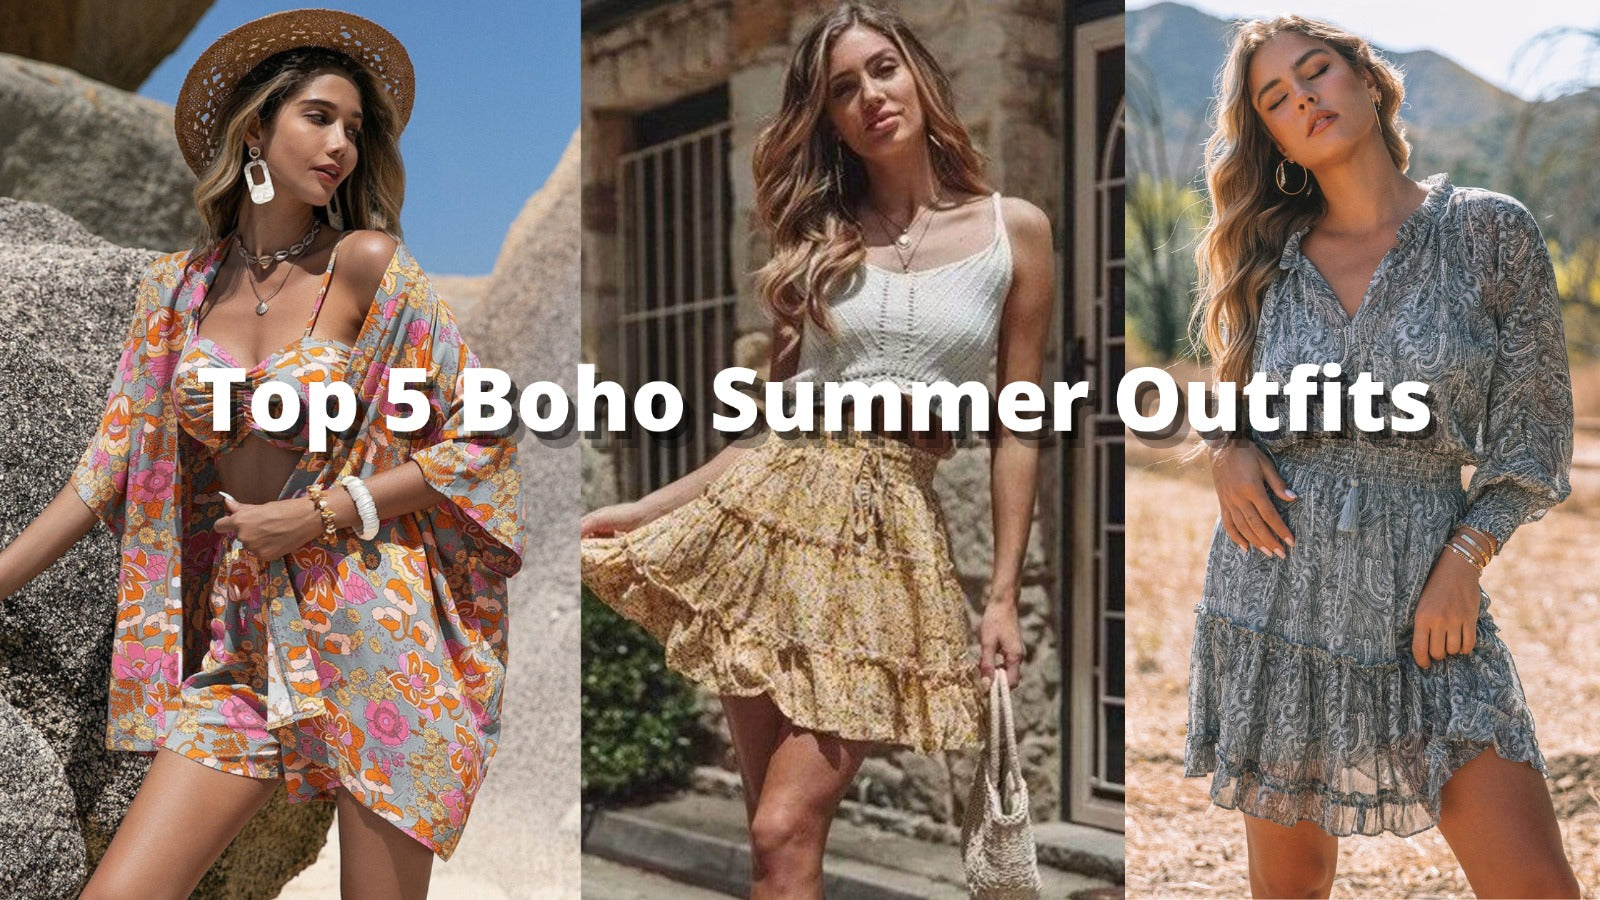 Top 5 Boho Summer Outfits